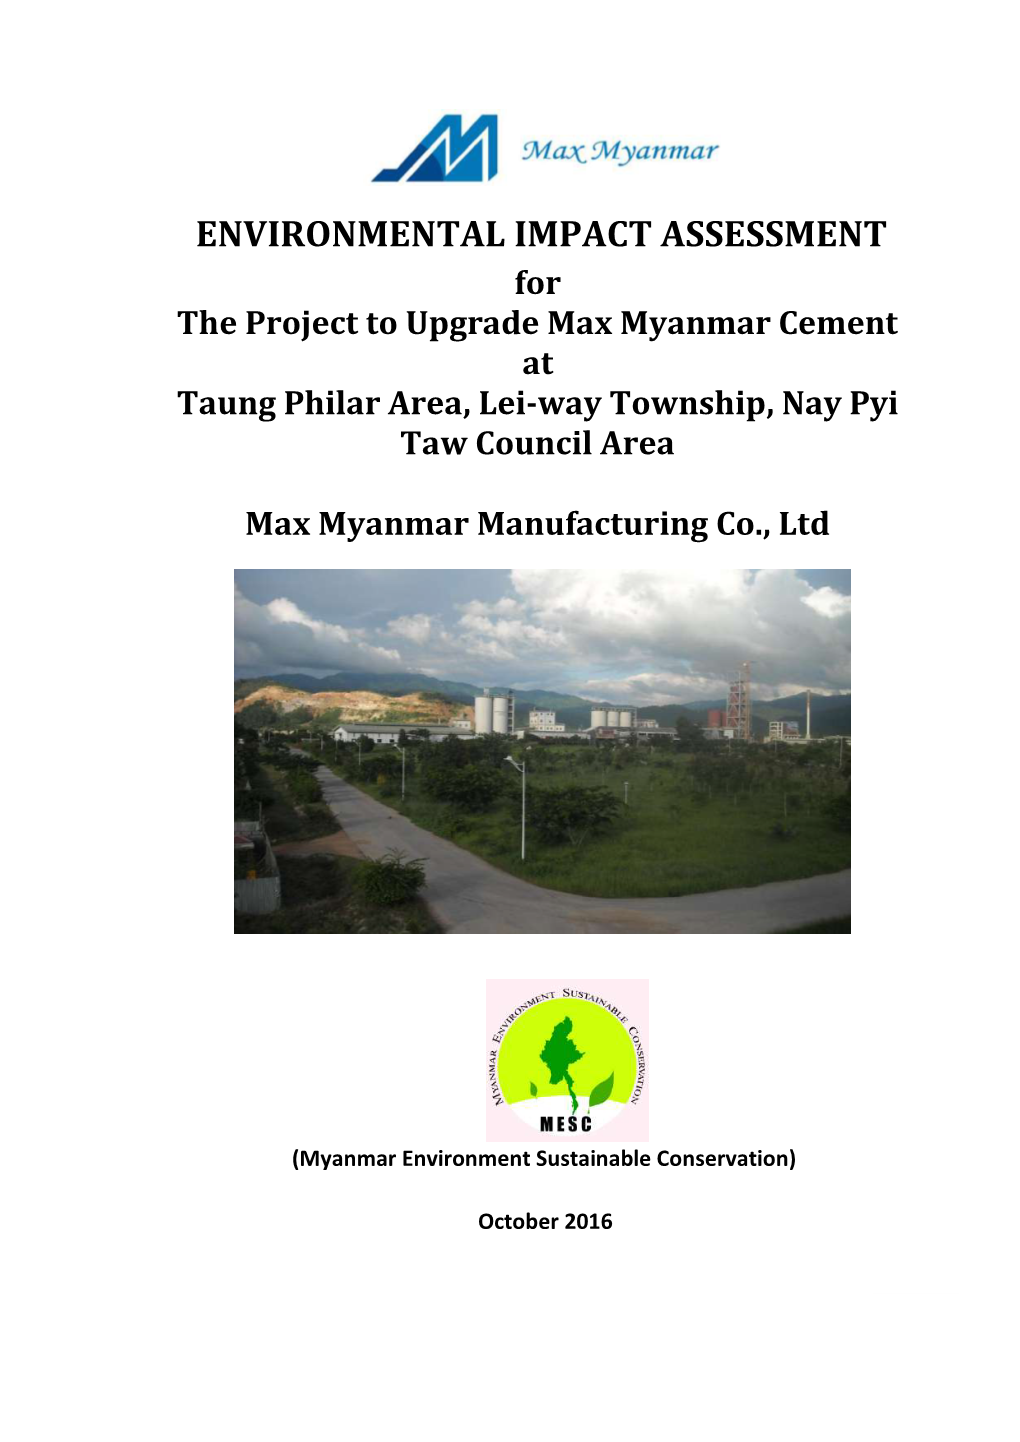 ENVIRONMENTAL IMPACT ASSESSMENT for the Project to Upgrade Max Myanmar Cement at Taung Philar Area, Lei-Way Township, Nay Pyi Taw Council Area